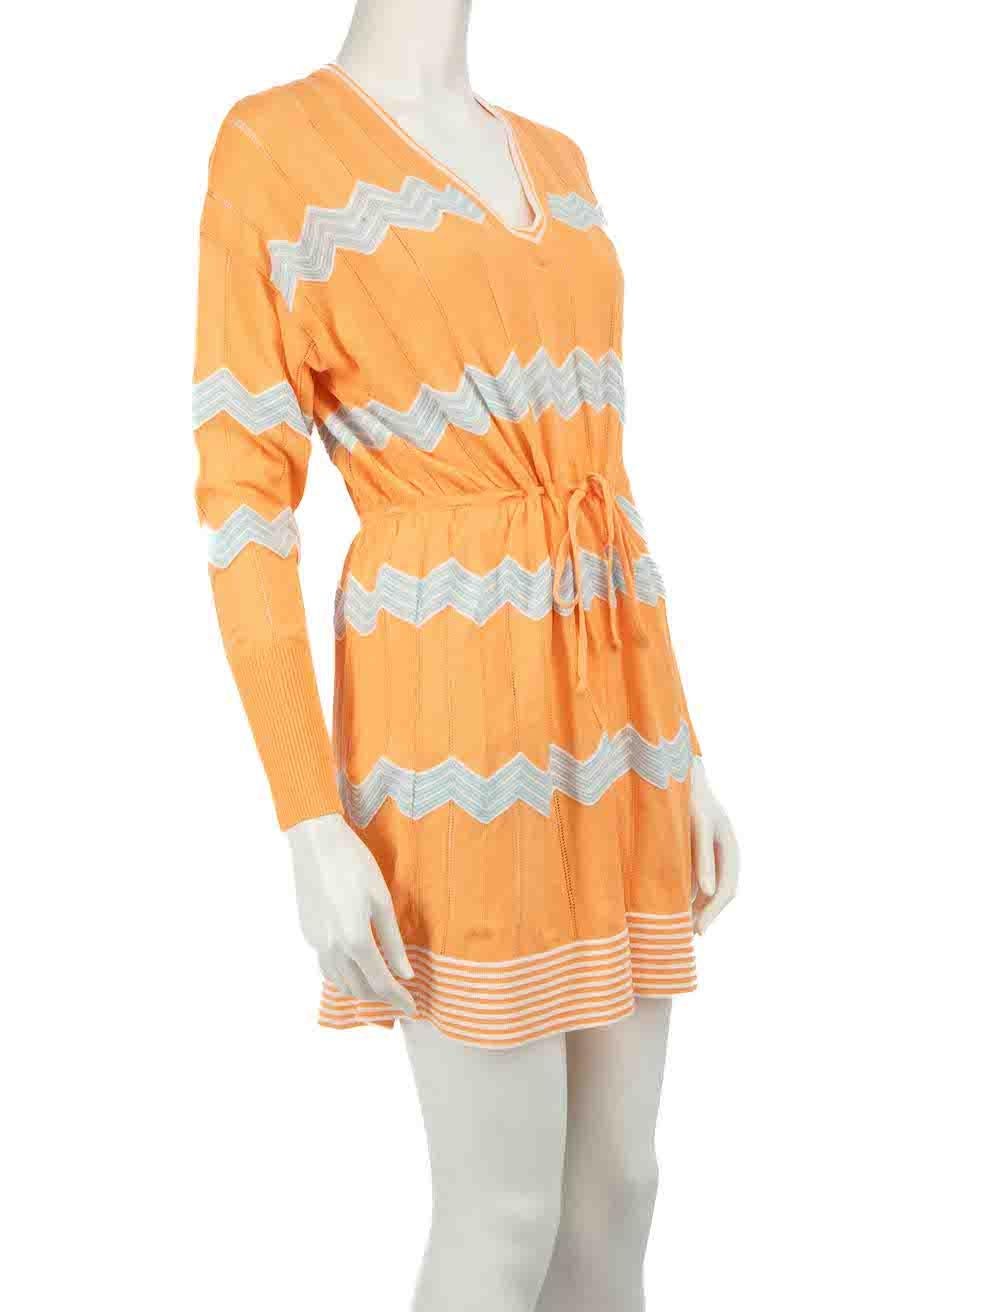 CONDITION is Good. Minor wear to dress is evident. Light wear to right shoulder where a hole is seen on this used M Missoni designer resale item.
 
 
 
 Details
 
 
 Orange
 
 Cotton
 
 Knit dress
 
 Zigzag pattern
 
 V-neck
 
 Long sleeves
 
 Mini
